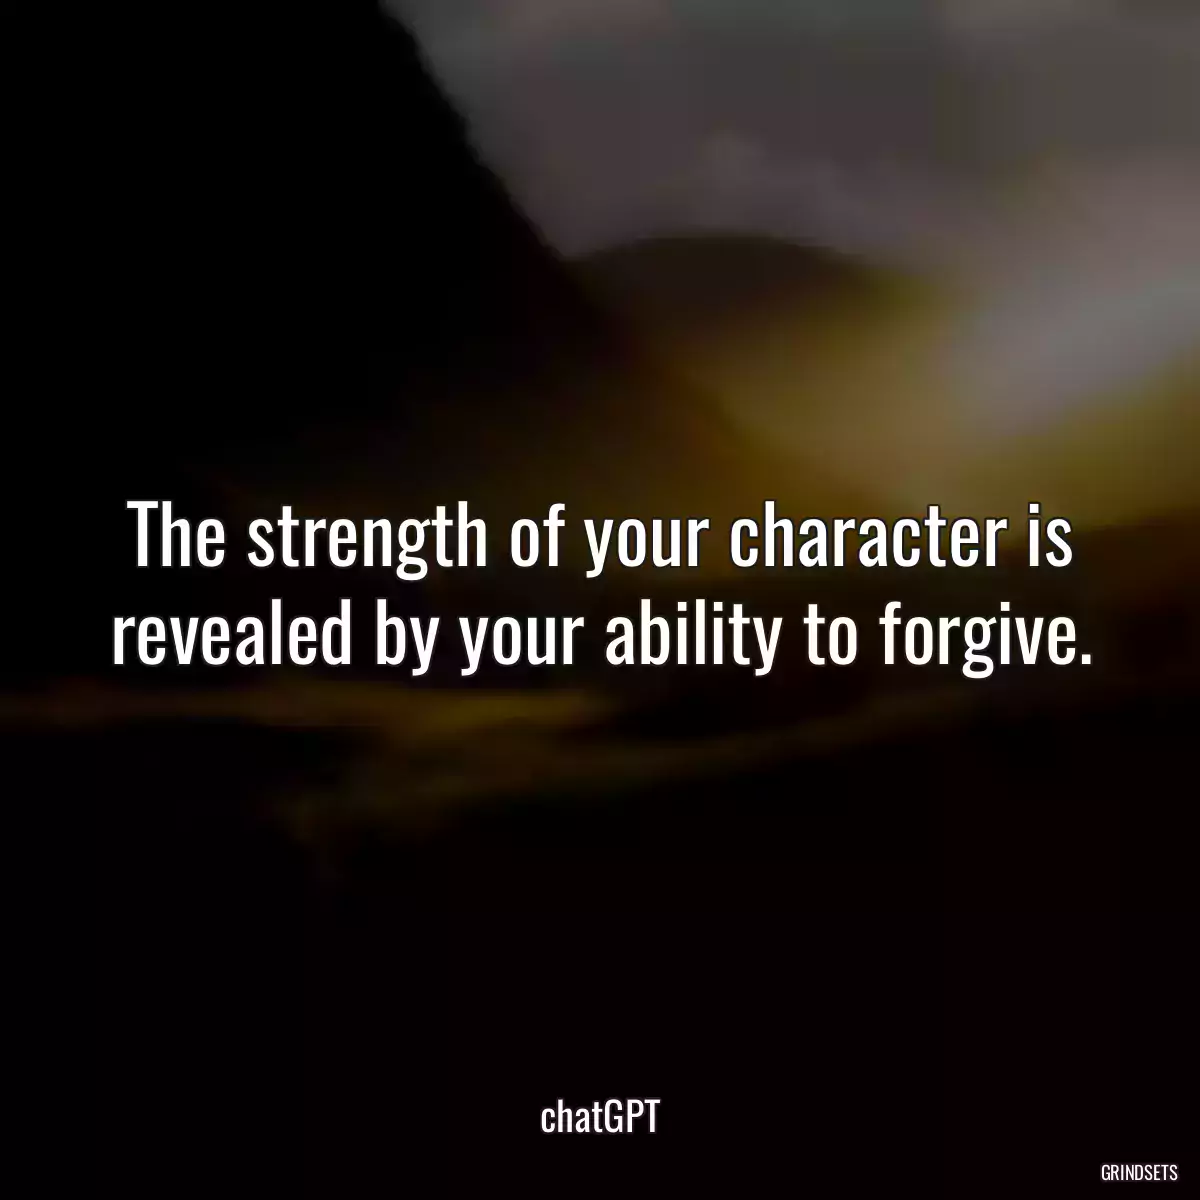 The strength of your character is revealed by your ability to forgive.